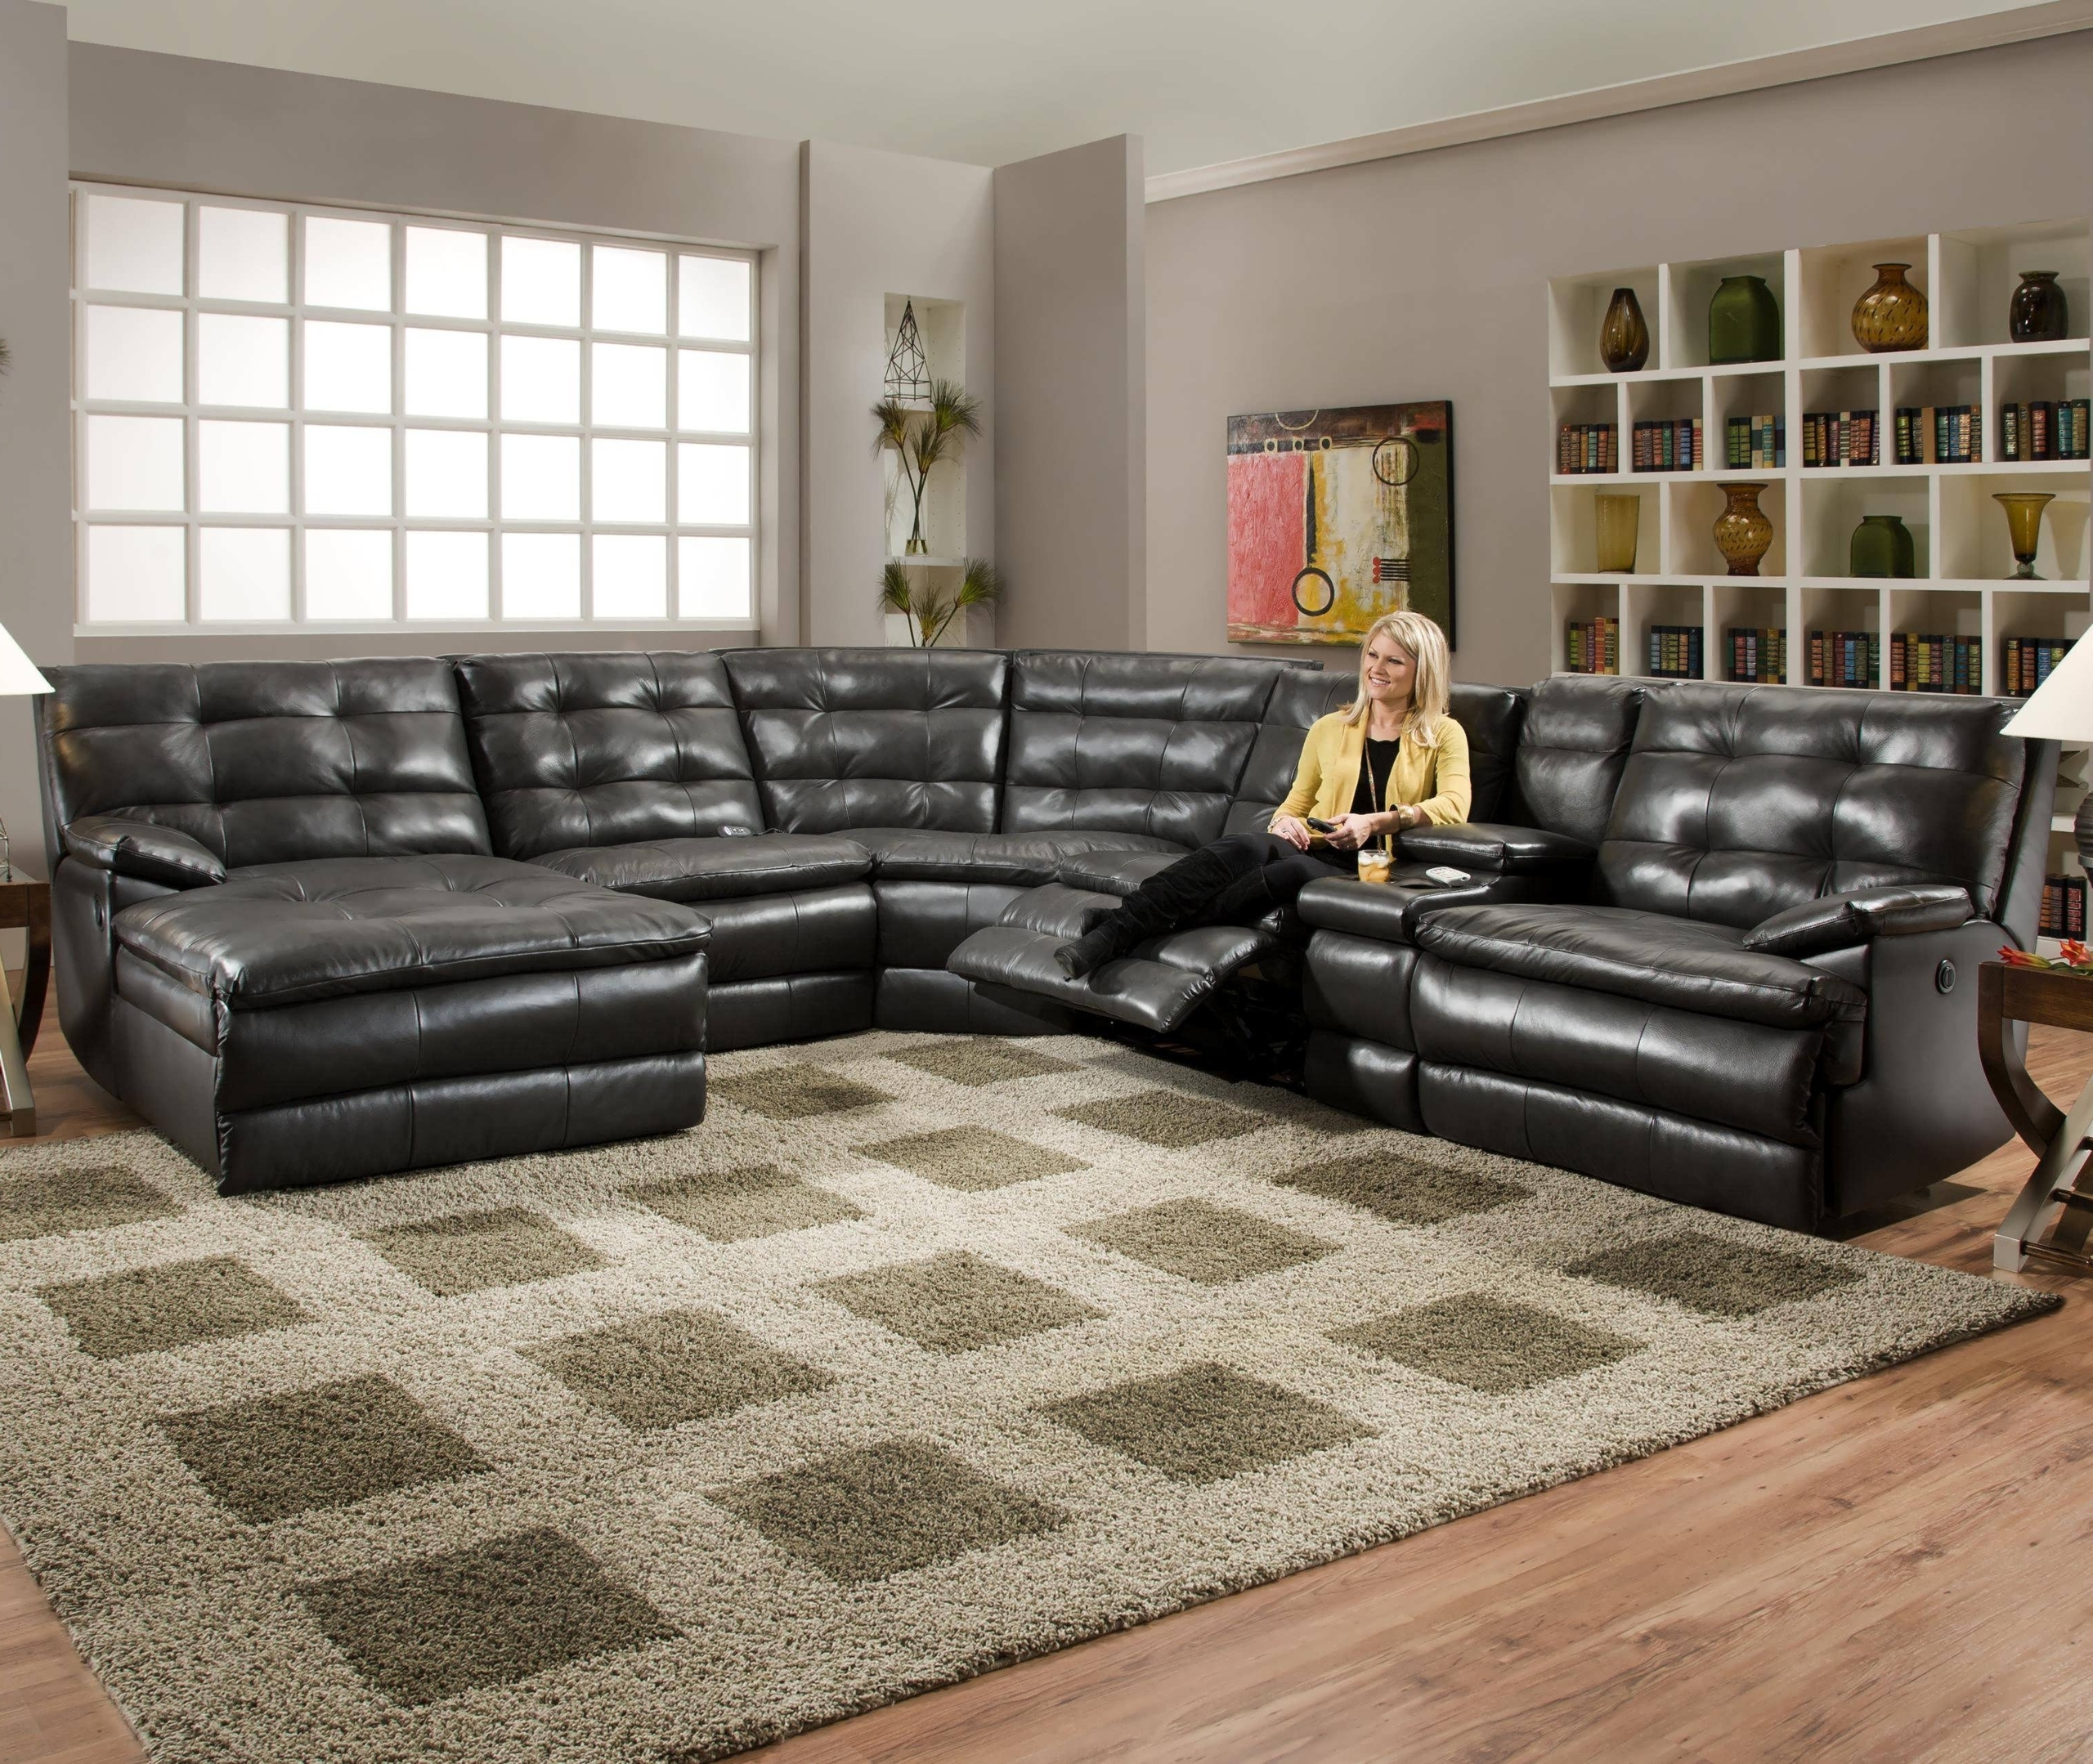 Extra Large Sectional Sofa Visualhunt, Extra Long Leather Sectional Couch